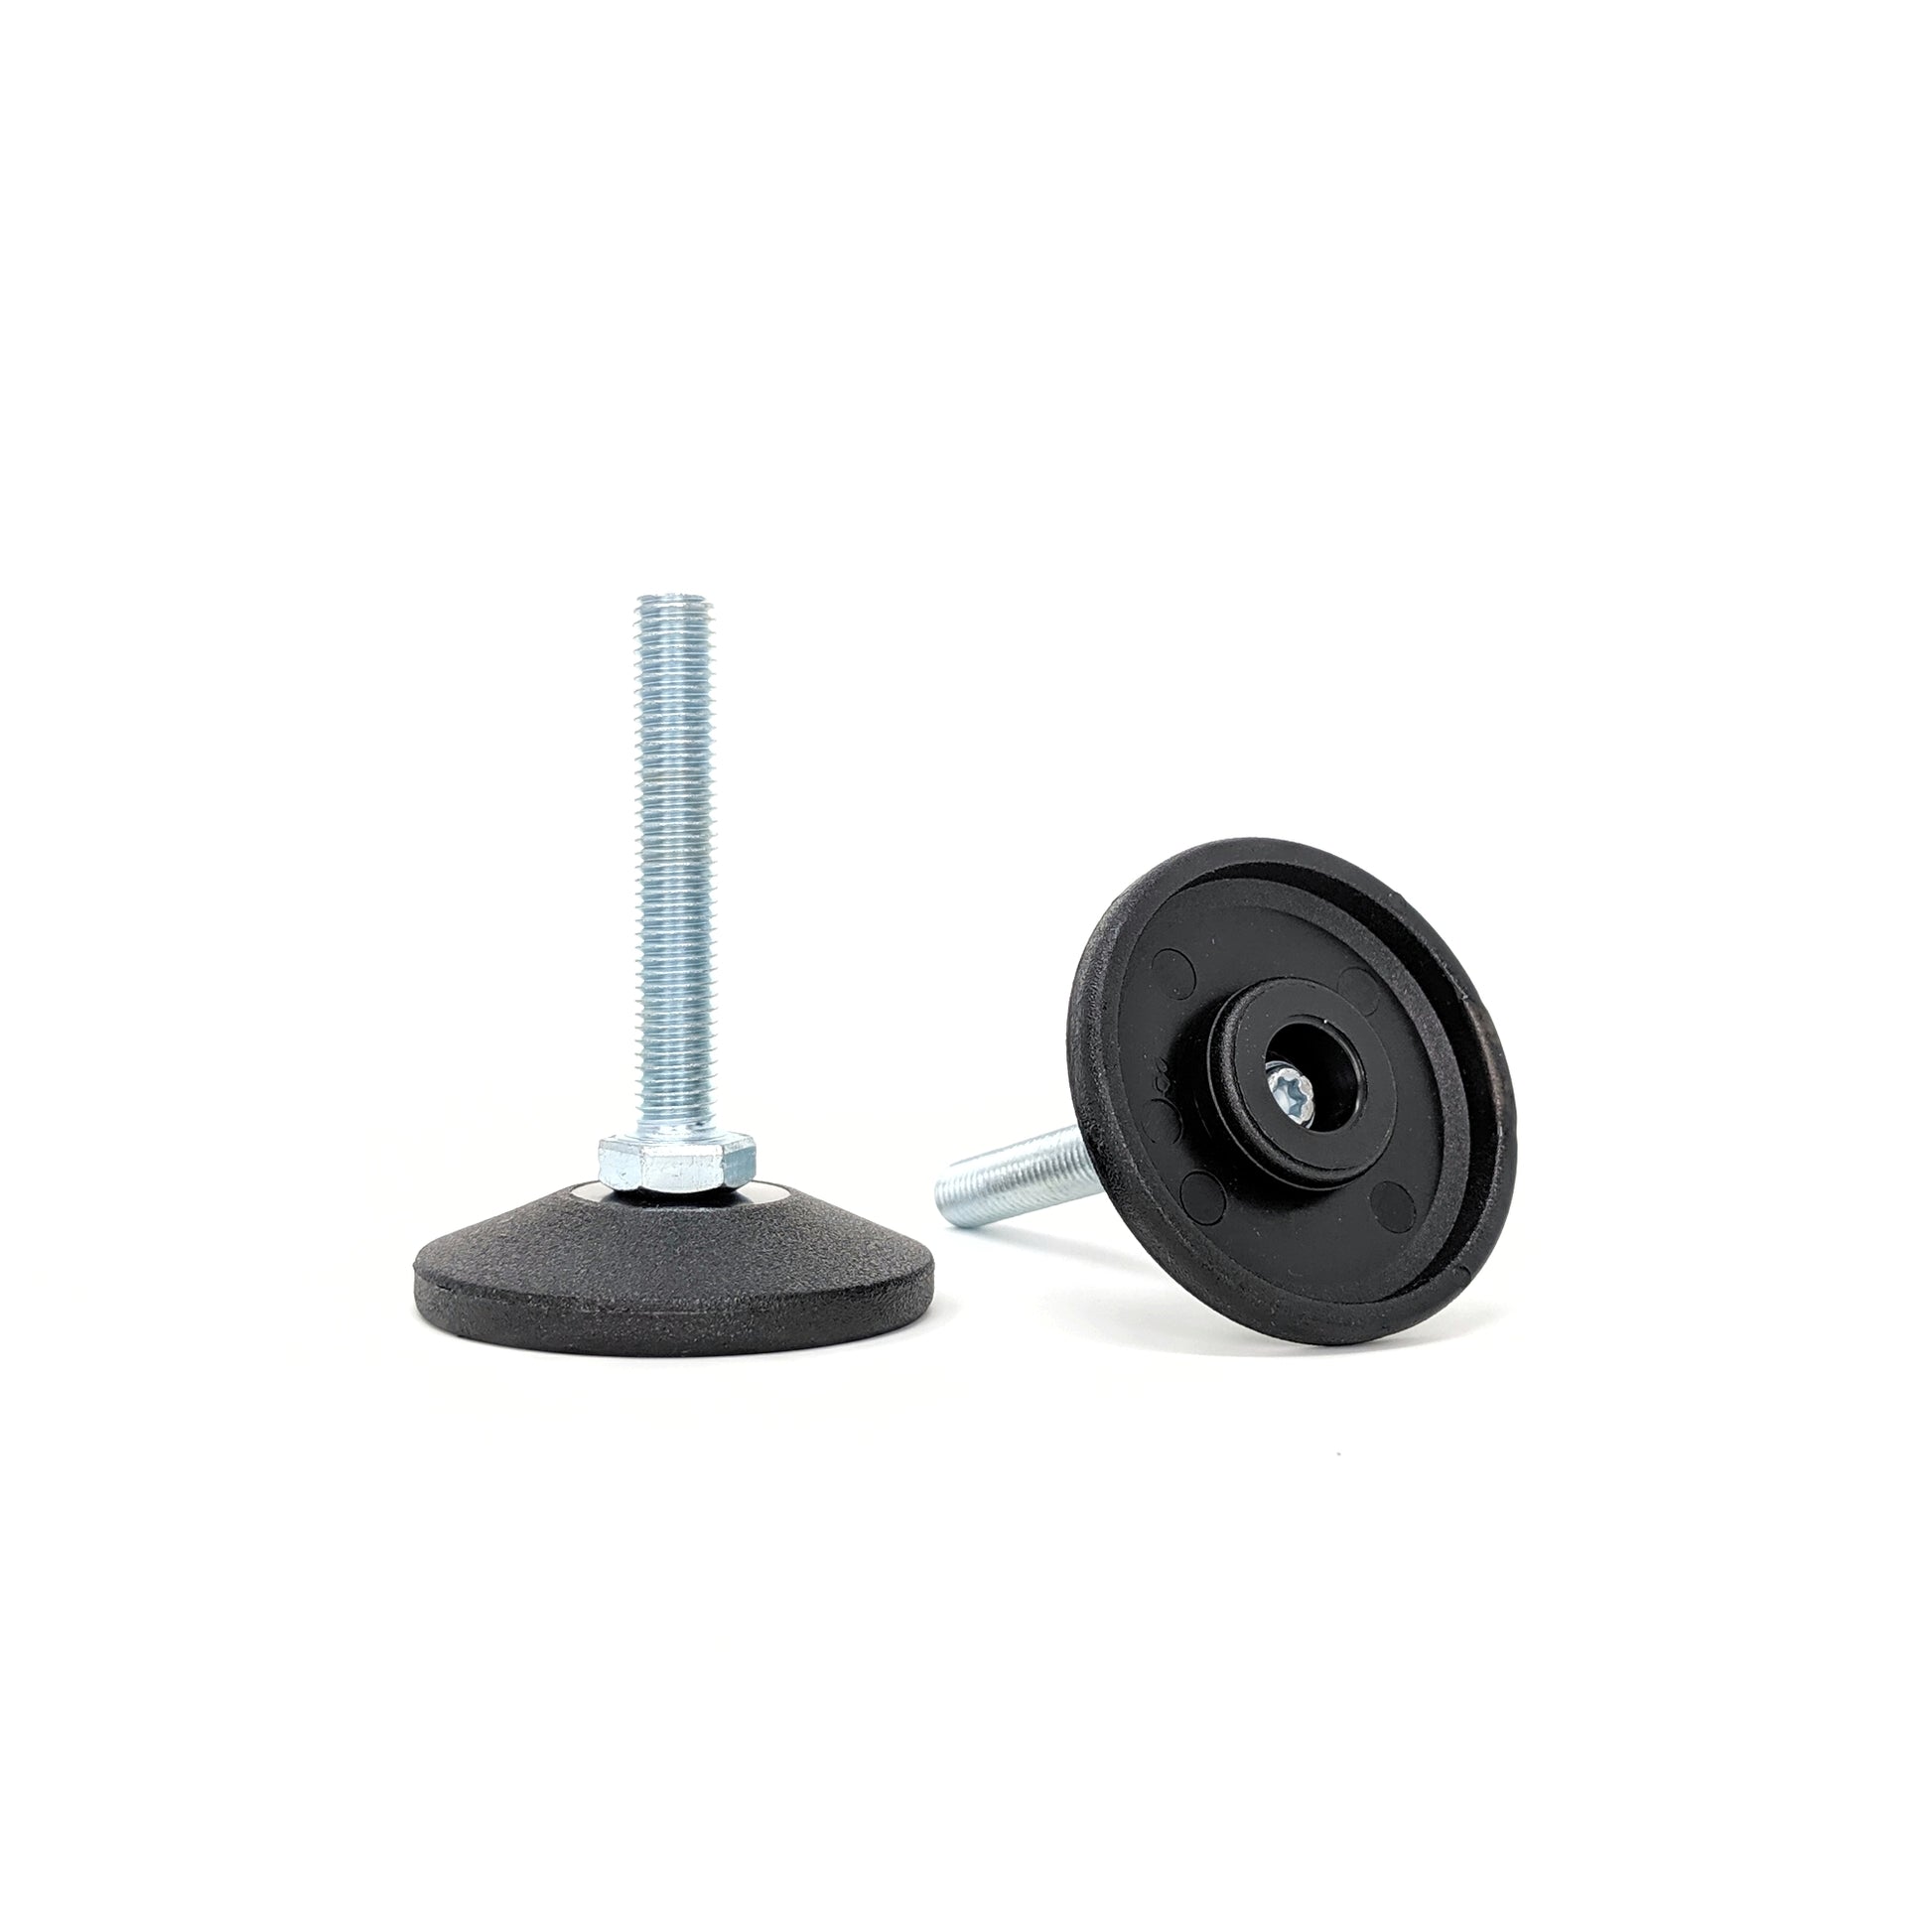 Adjustable Feet, 48mm Dia. Base, M8 50mm Thread, 400kg Static Load Capacity - Made In Germany - Keay Vital Parts